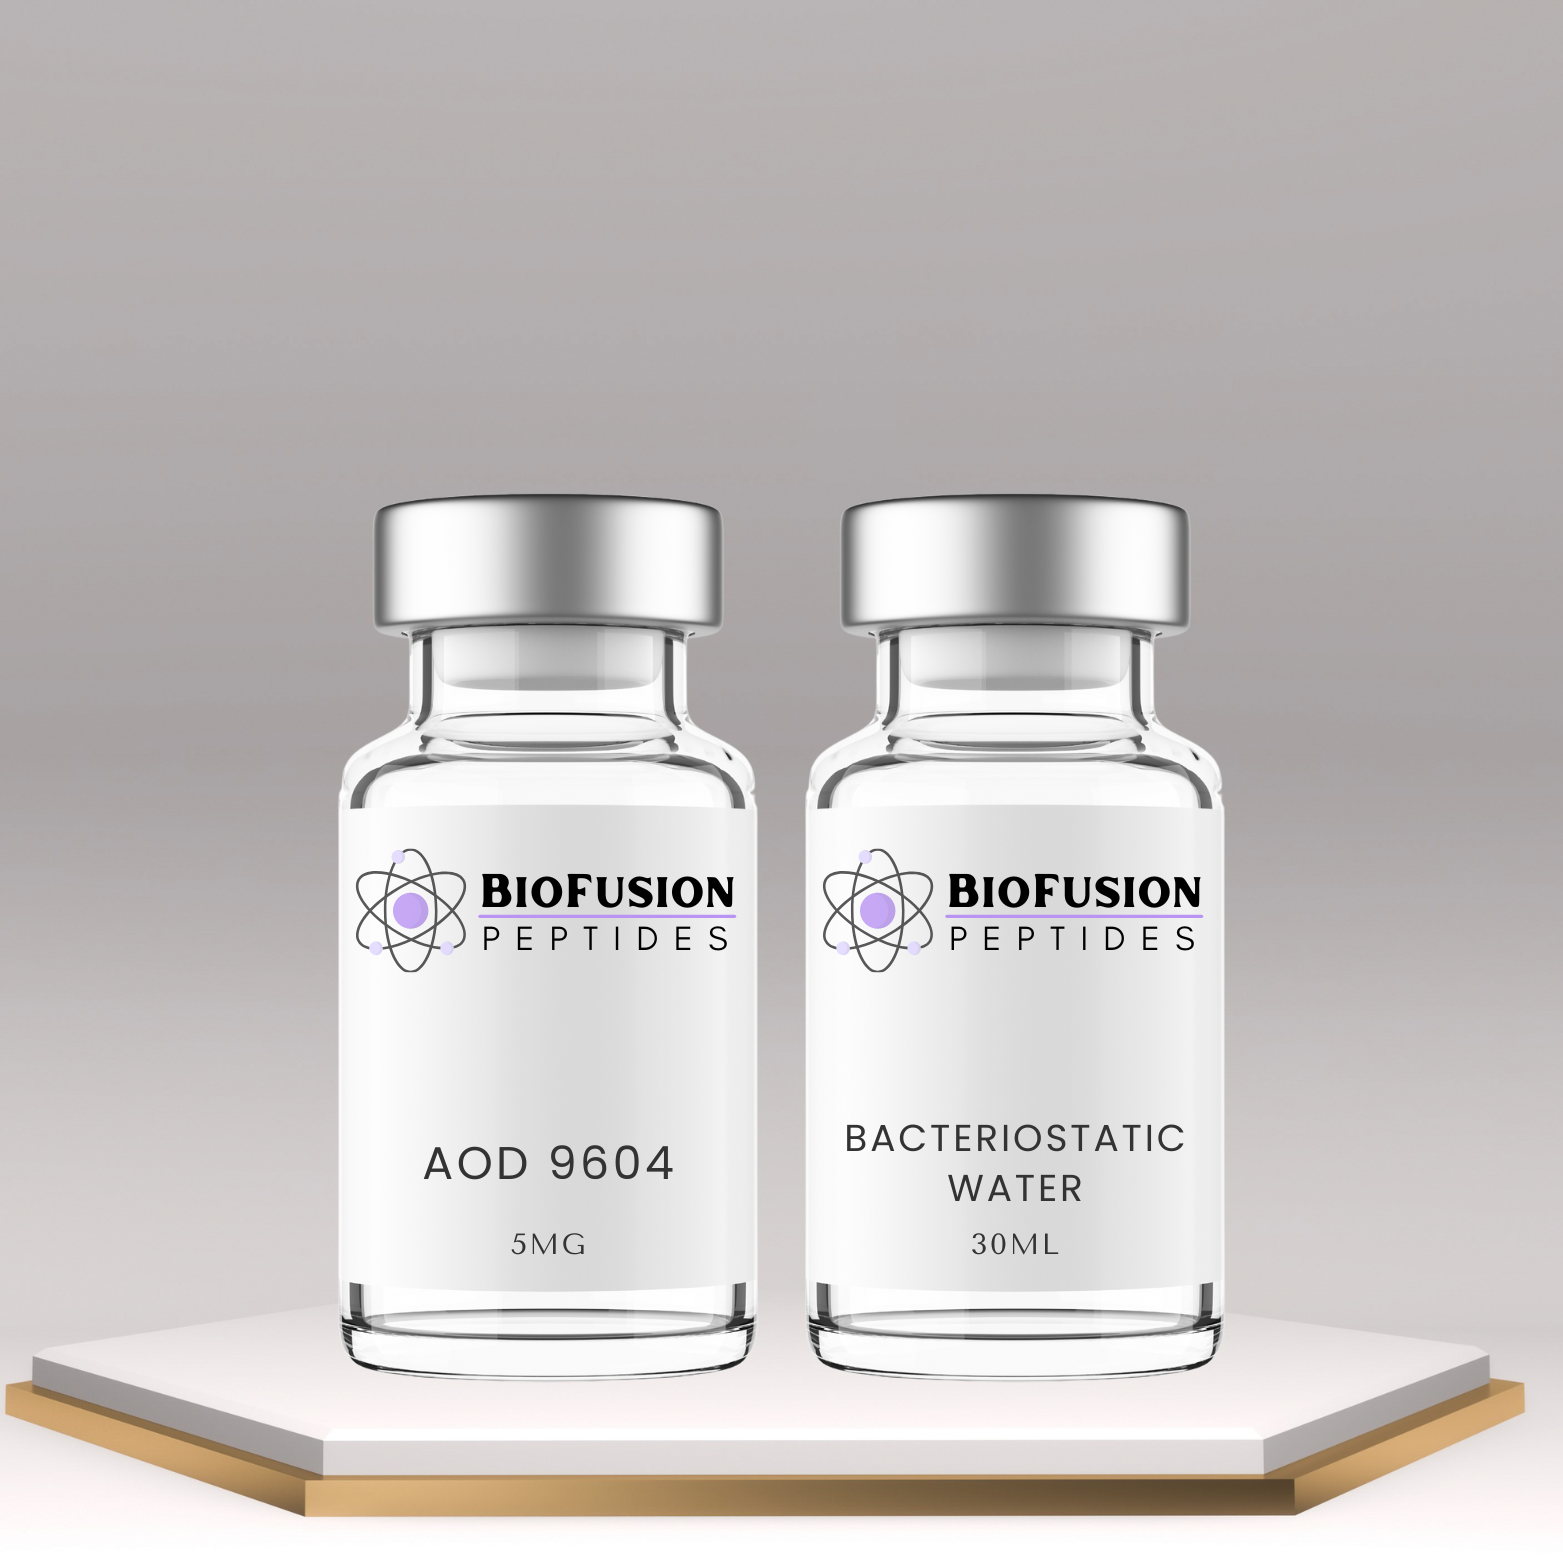 BioFusion Peptides AOD 9604 kit with bacteriostatic water